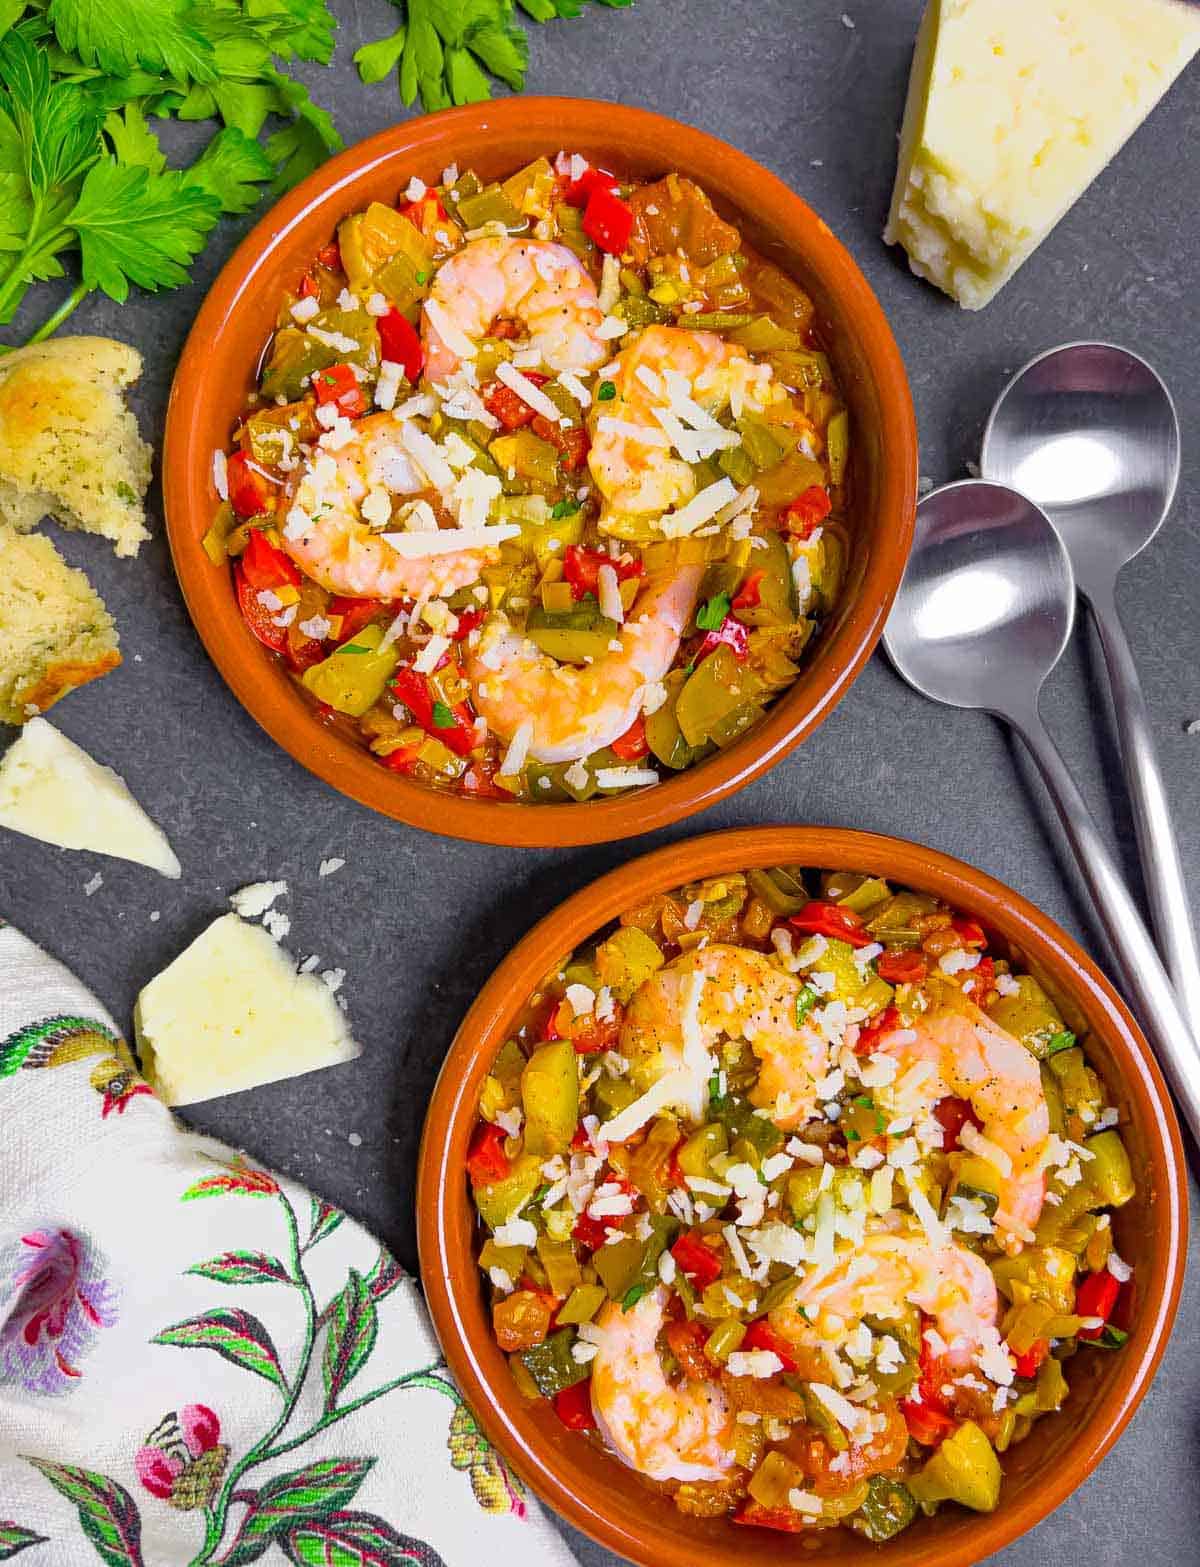 Two terra cotta cazuelas filled with Spanish vegetable stew topped with whole shrimp and manchego cheese.